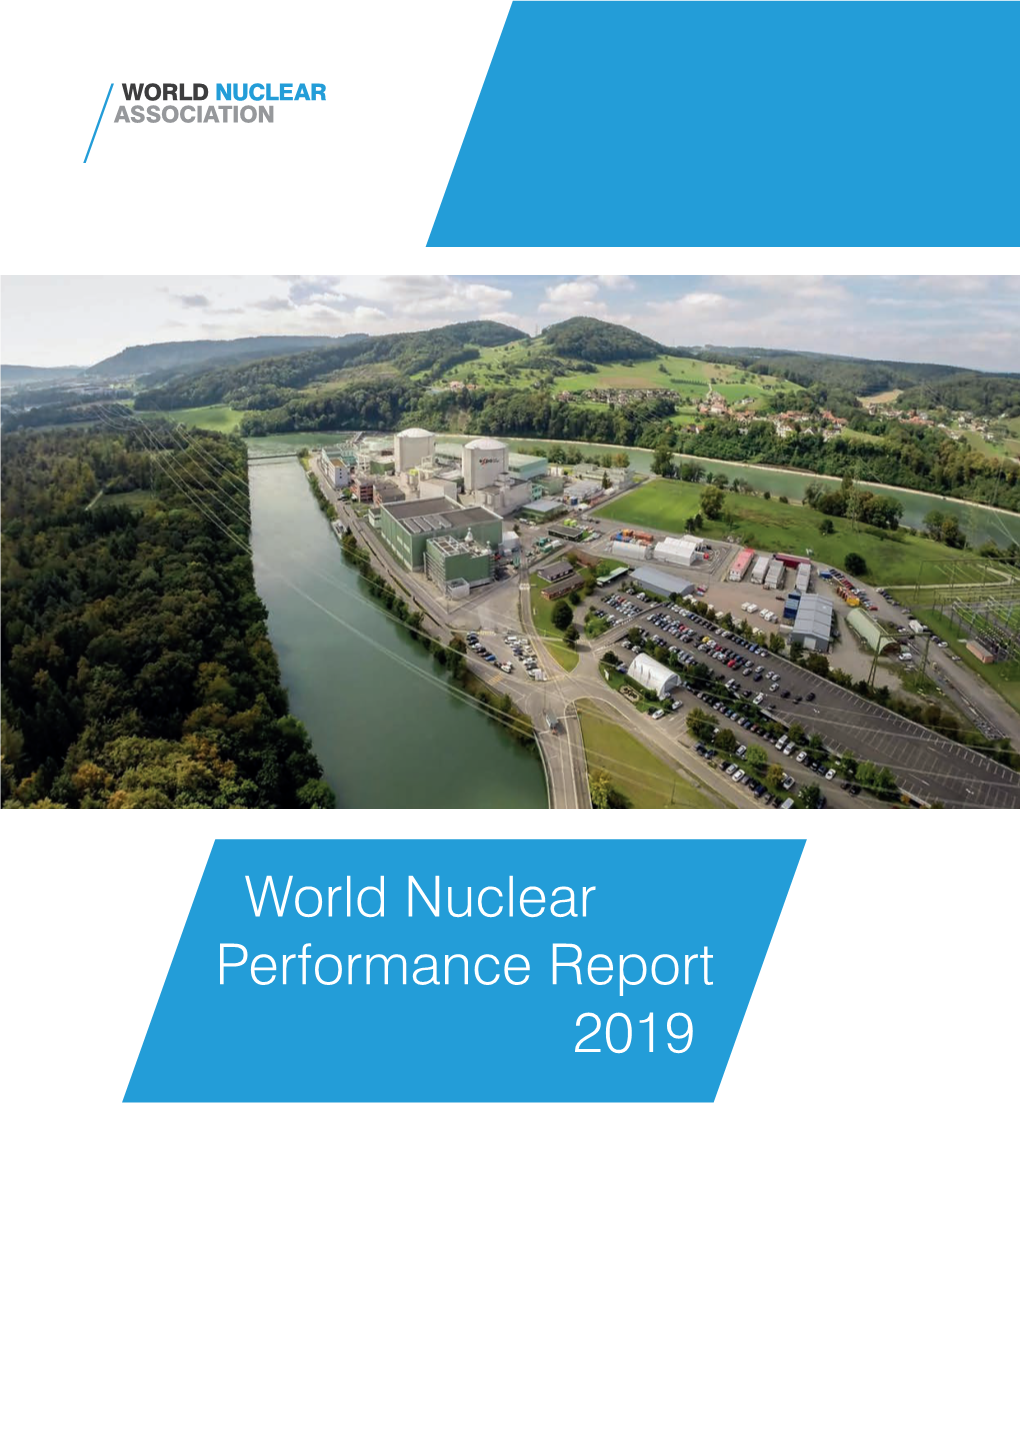 World Nuclear Performance Report 2019 Title: World Nuclear Performance Report 2019 Produced By: World Nuclear Association Published: August 2019 Report No